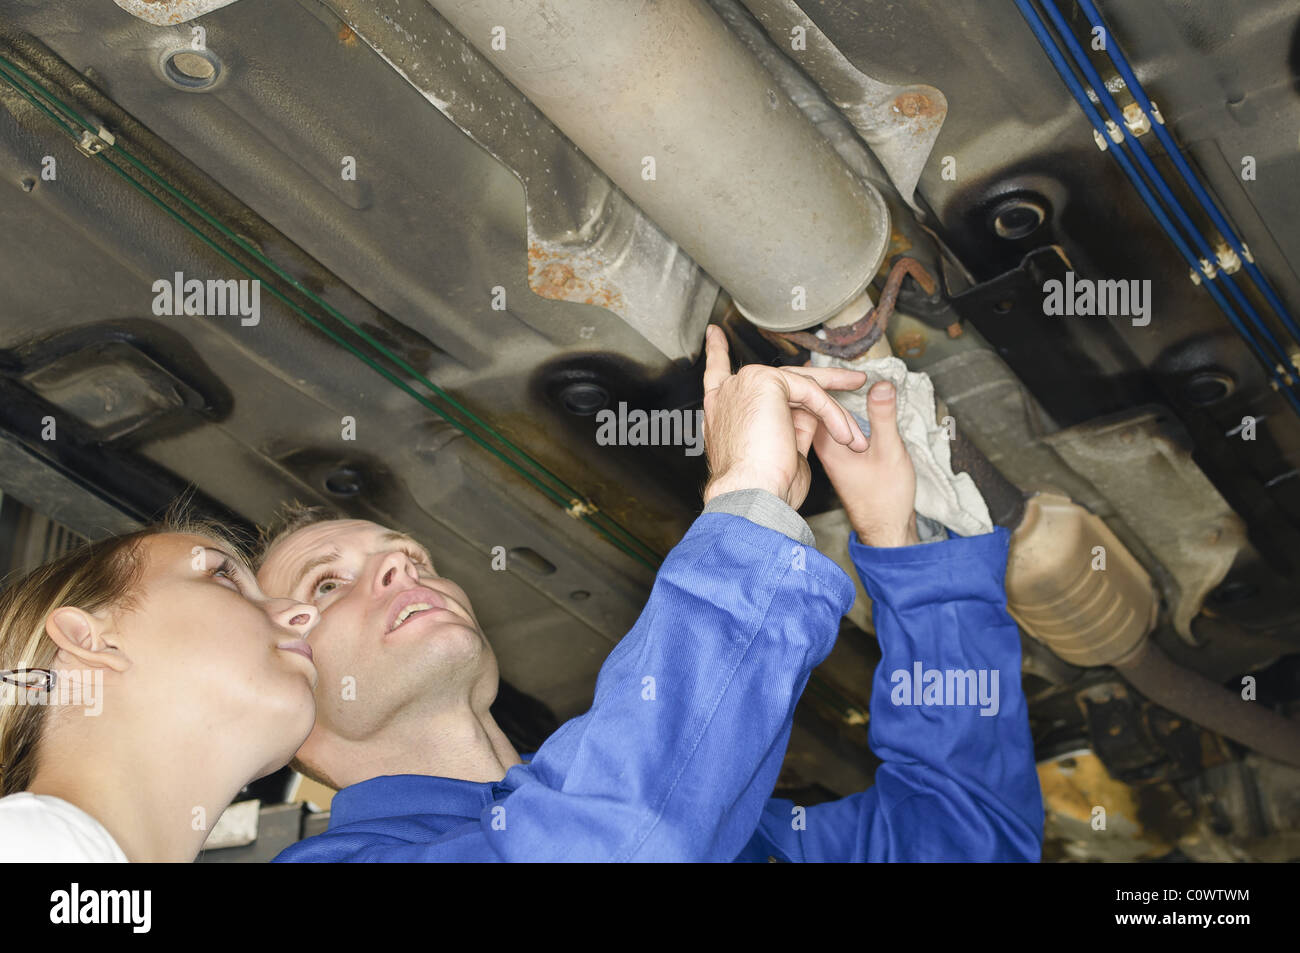 Garage exhaust system check Stock Photo